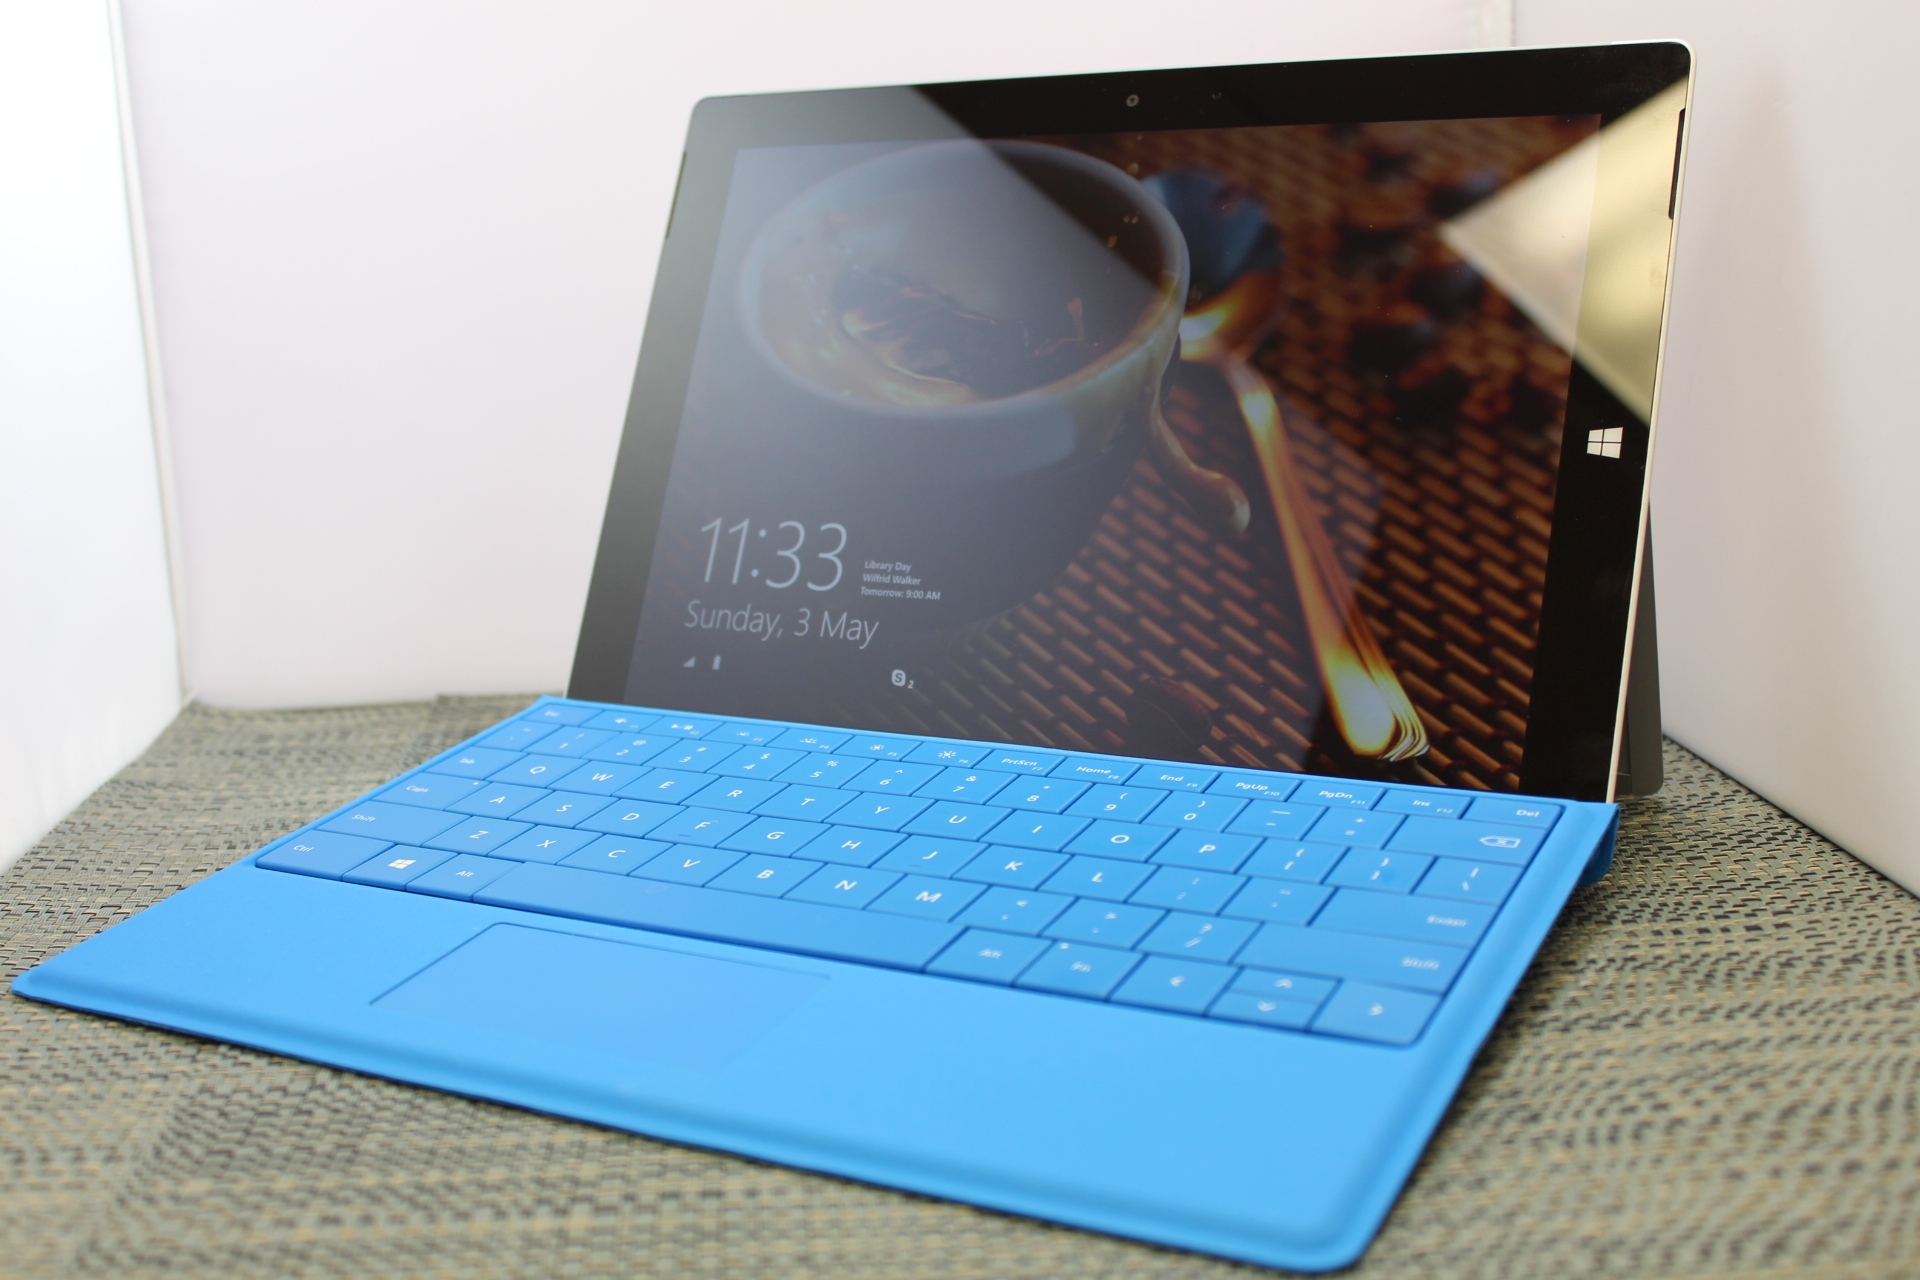 Kickstand and Accessories - The Surface 3 Review